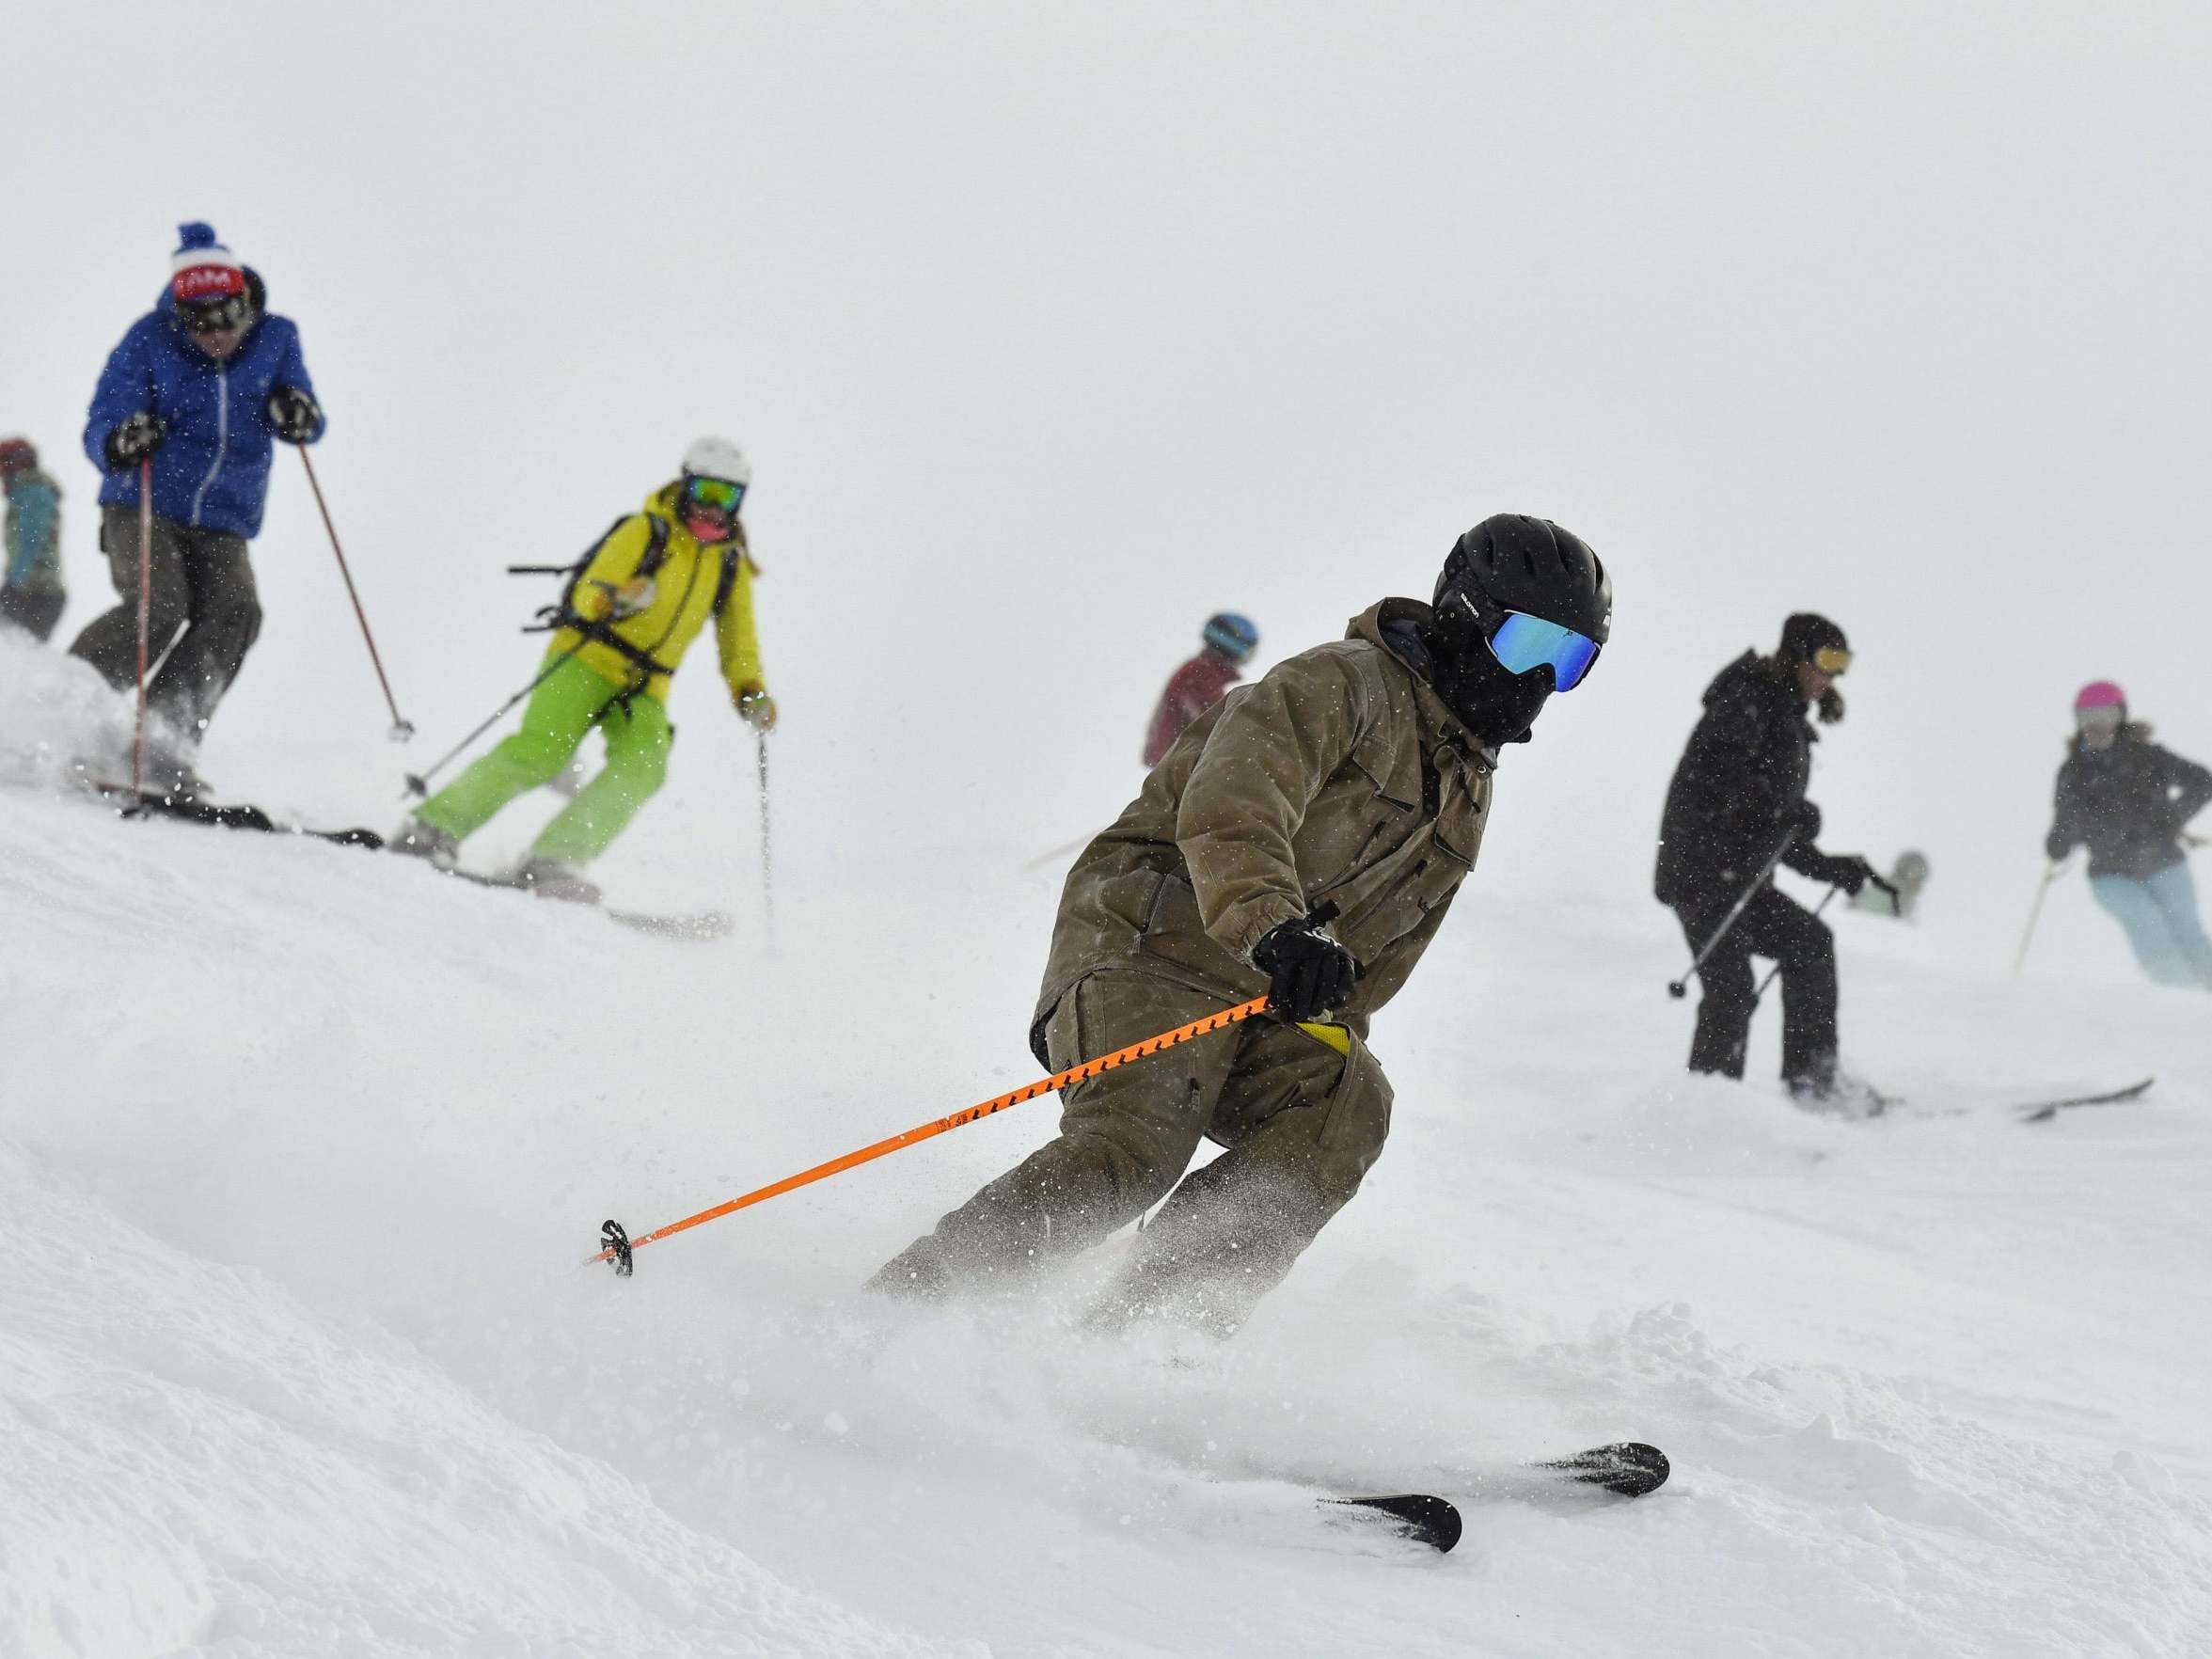 A week without any snowfall in Val Thorens proved enough to re-evaluate how we go skiing